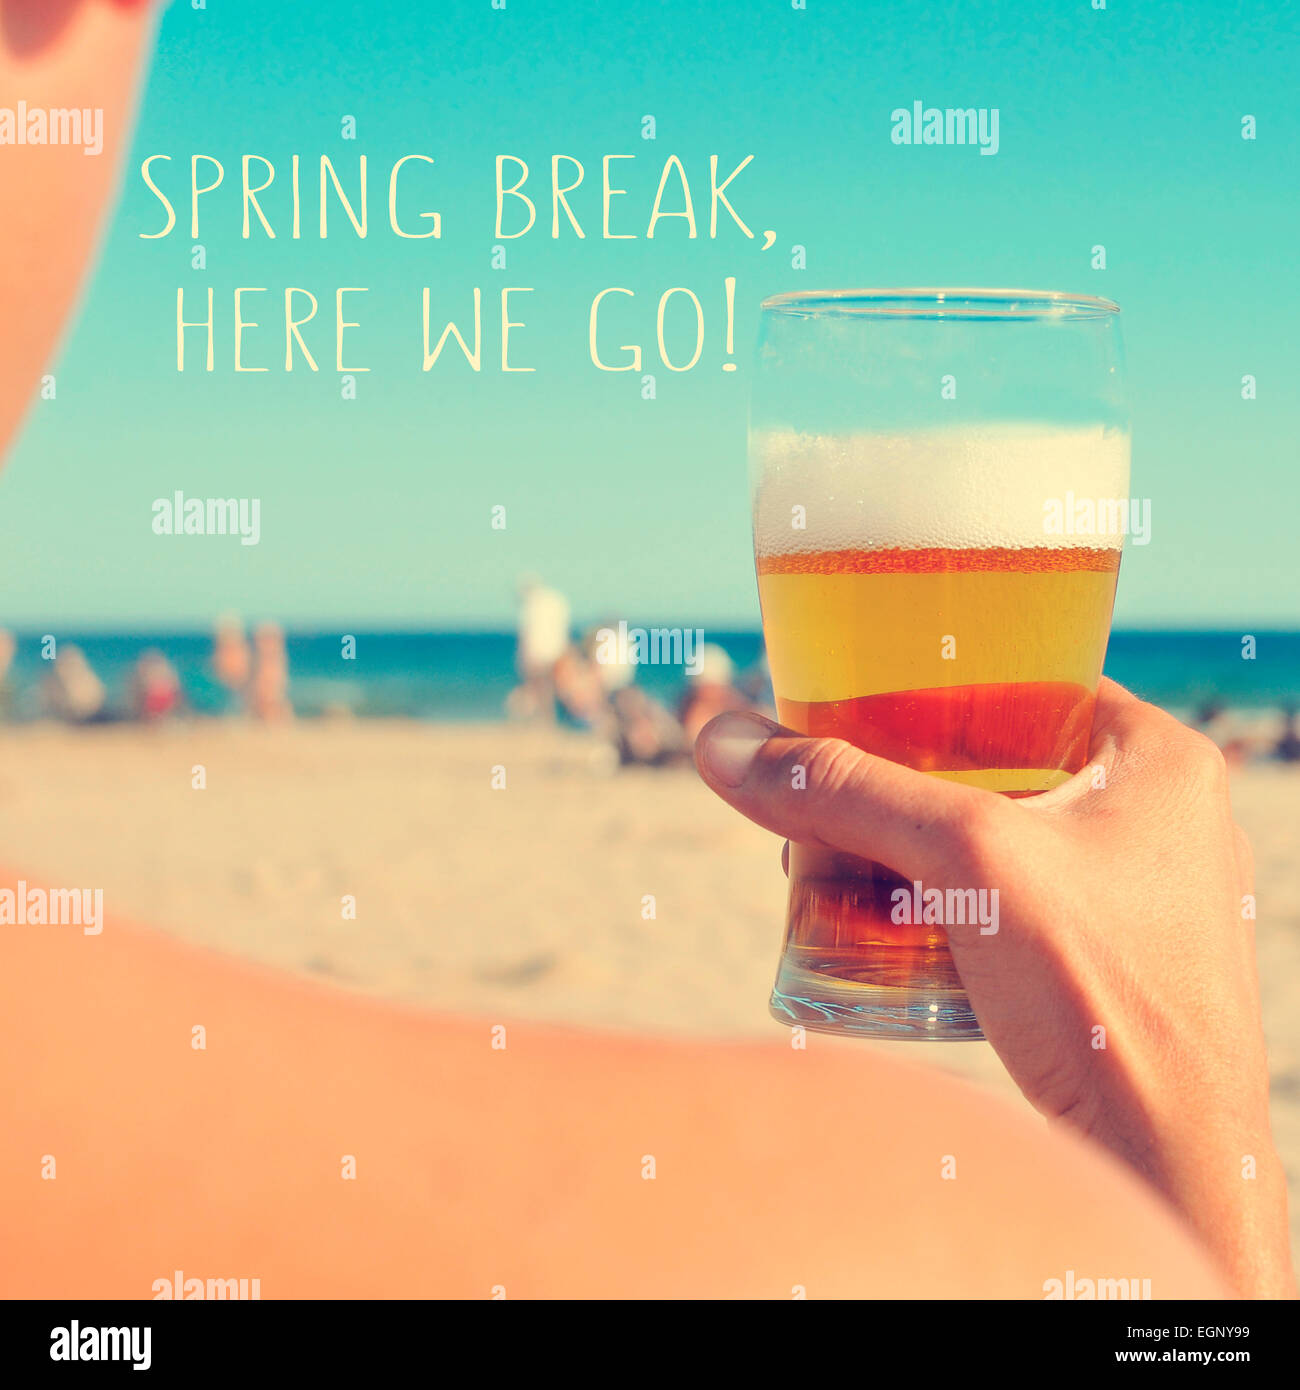 the text spring break, here we go written on a blurred image of a young man having a beer on the beach Stock Photo